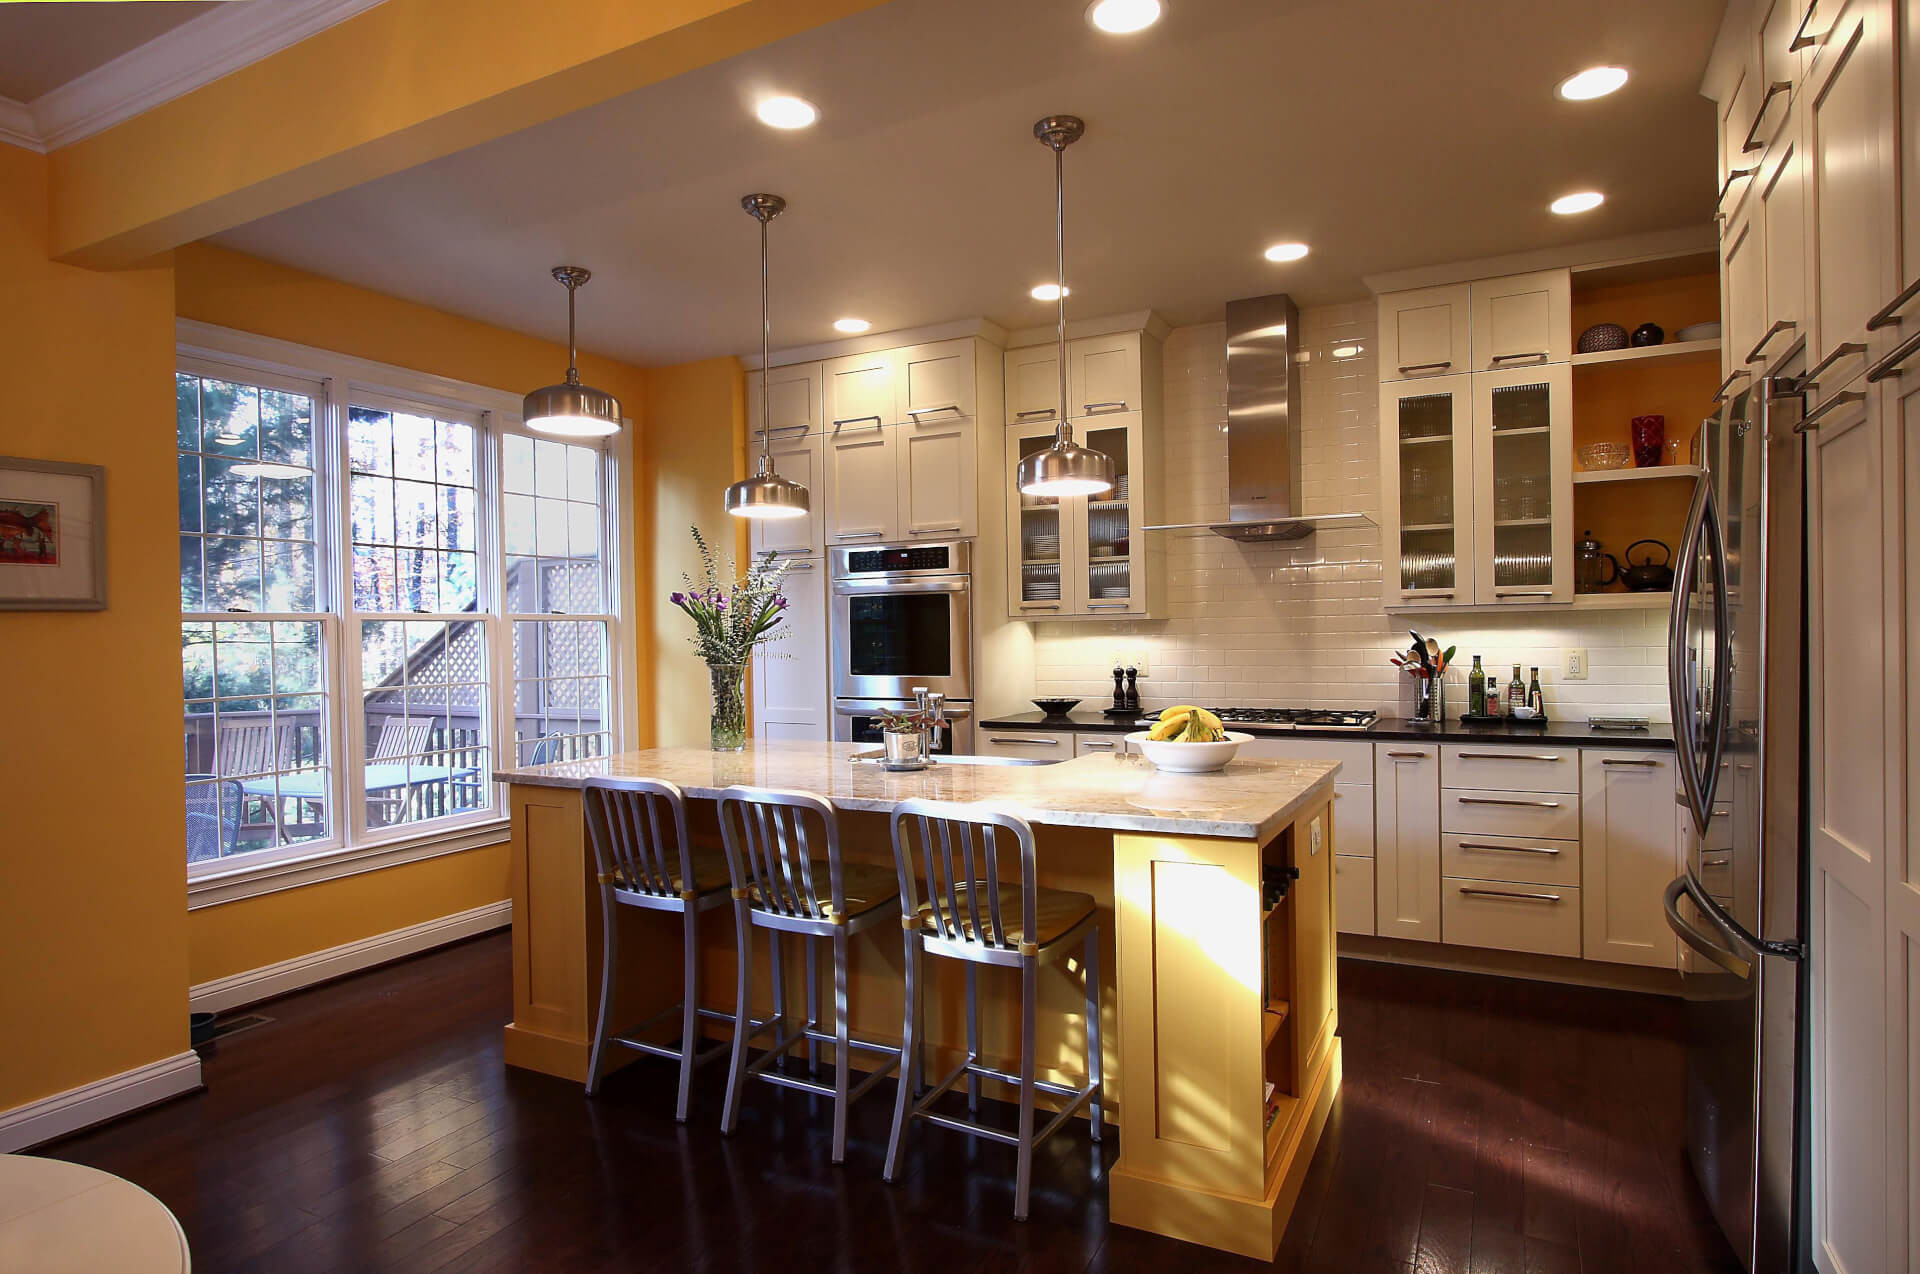 Small Kitchen Colour Ideas
 Kitchen Colors How to choose what colors to paint your